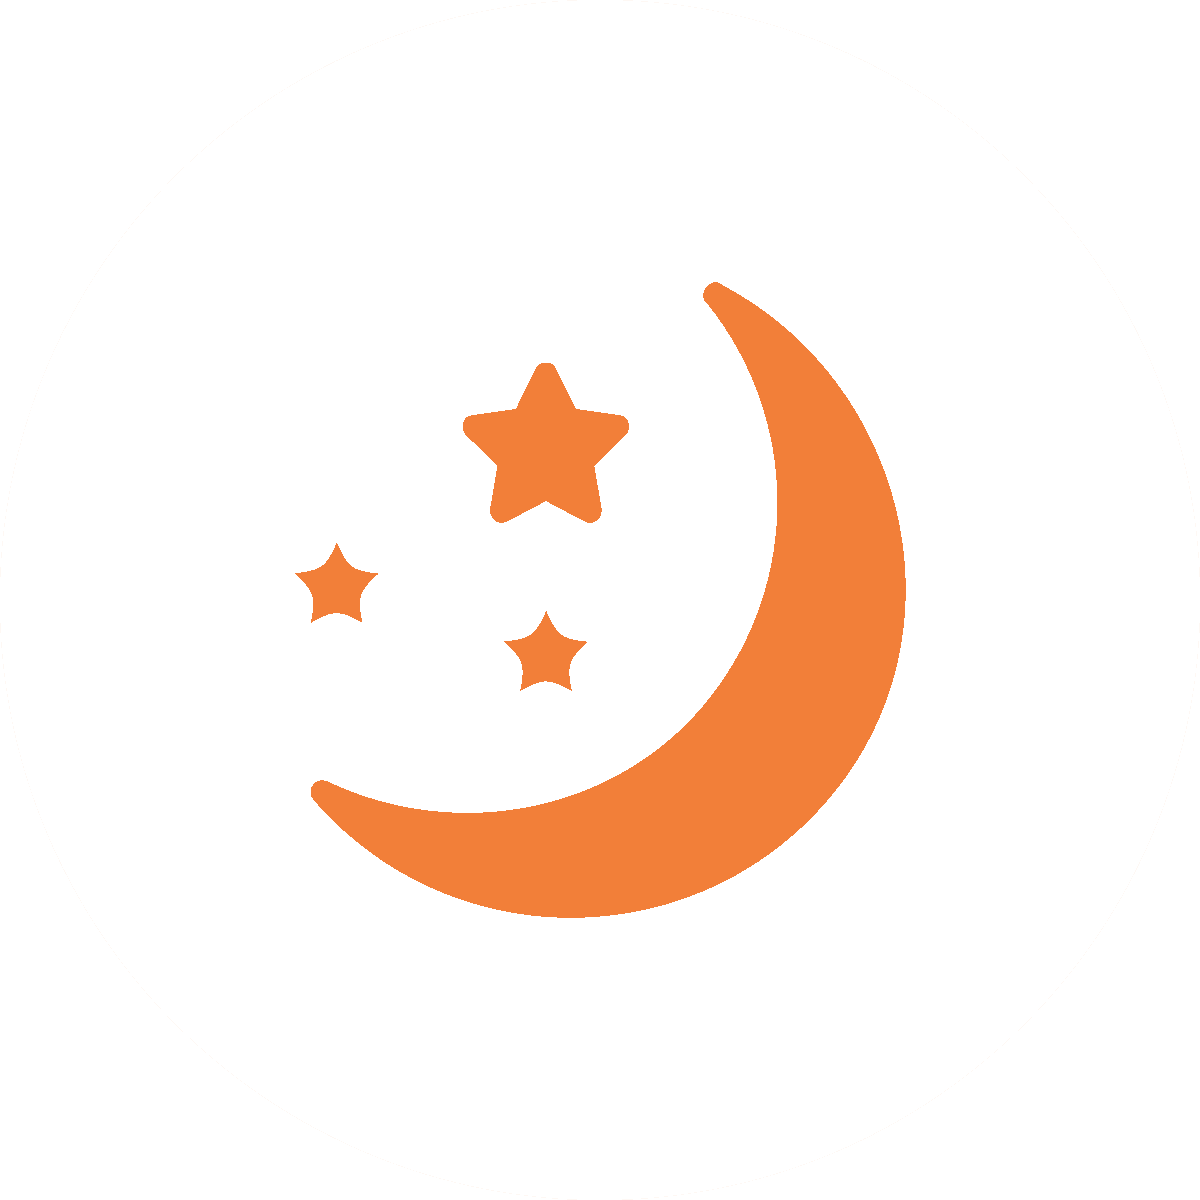 icon showing quarter moon and three stars